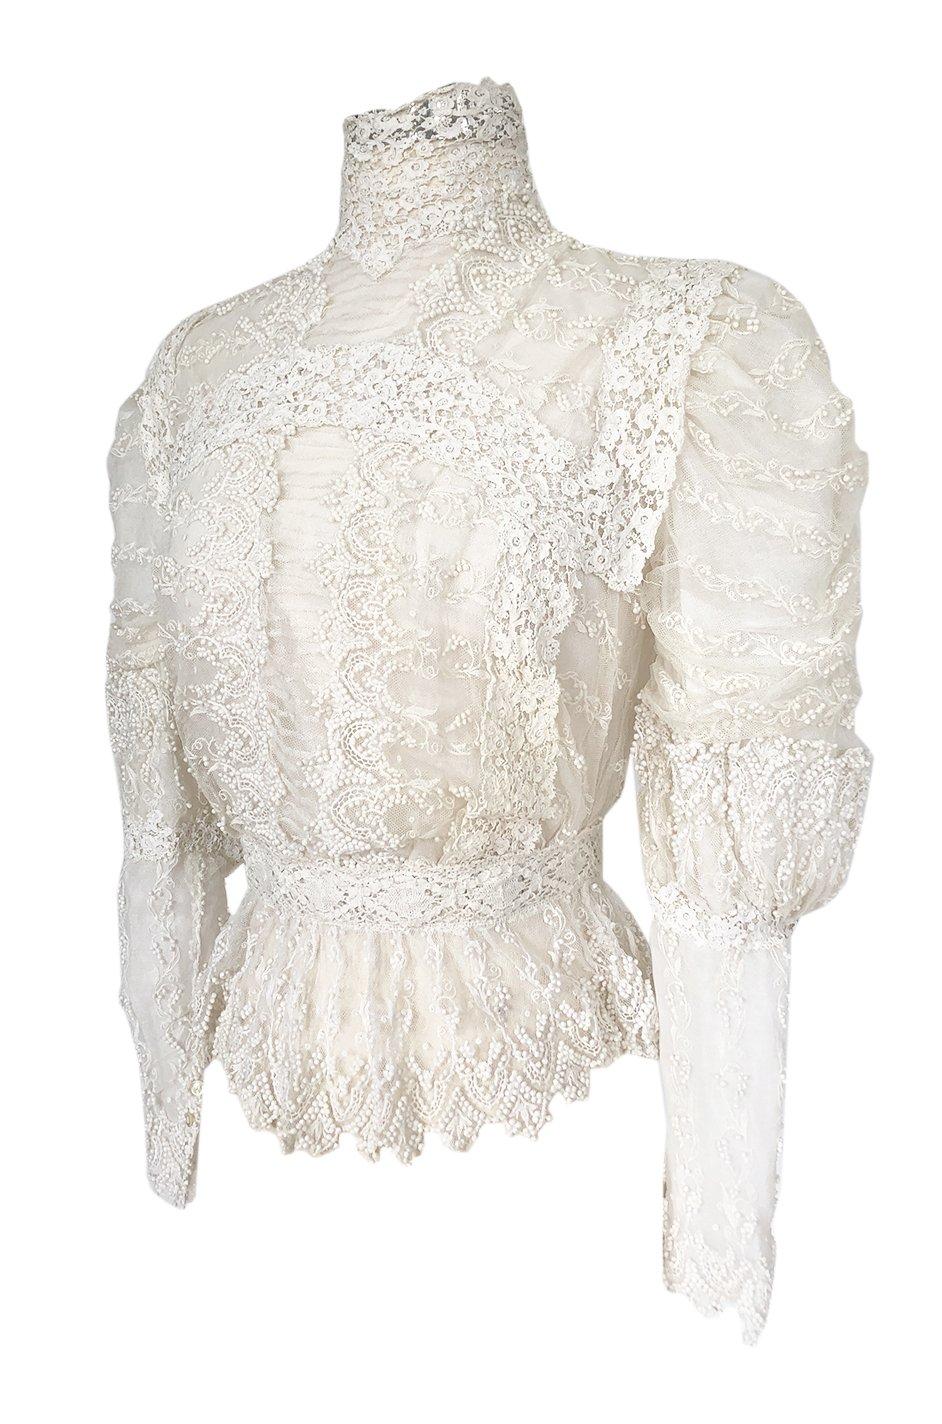 Women's c1900s 3D White Embroidered Lace on Fine Silk Net Top w Elaborate Sleeves